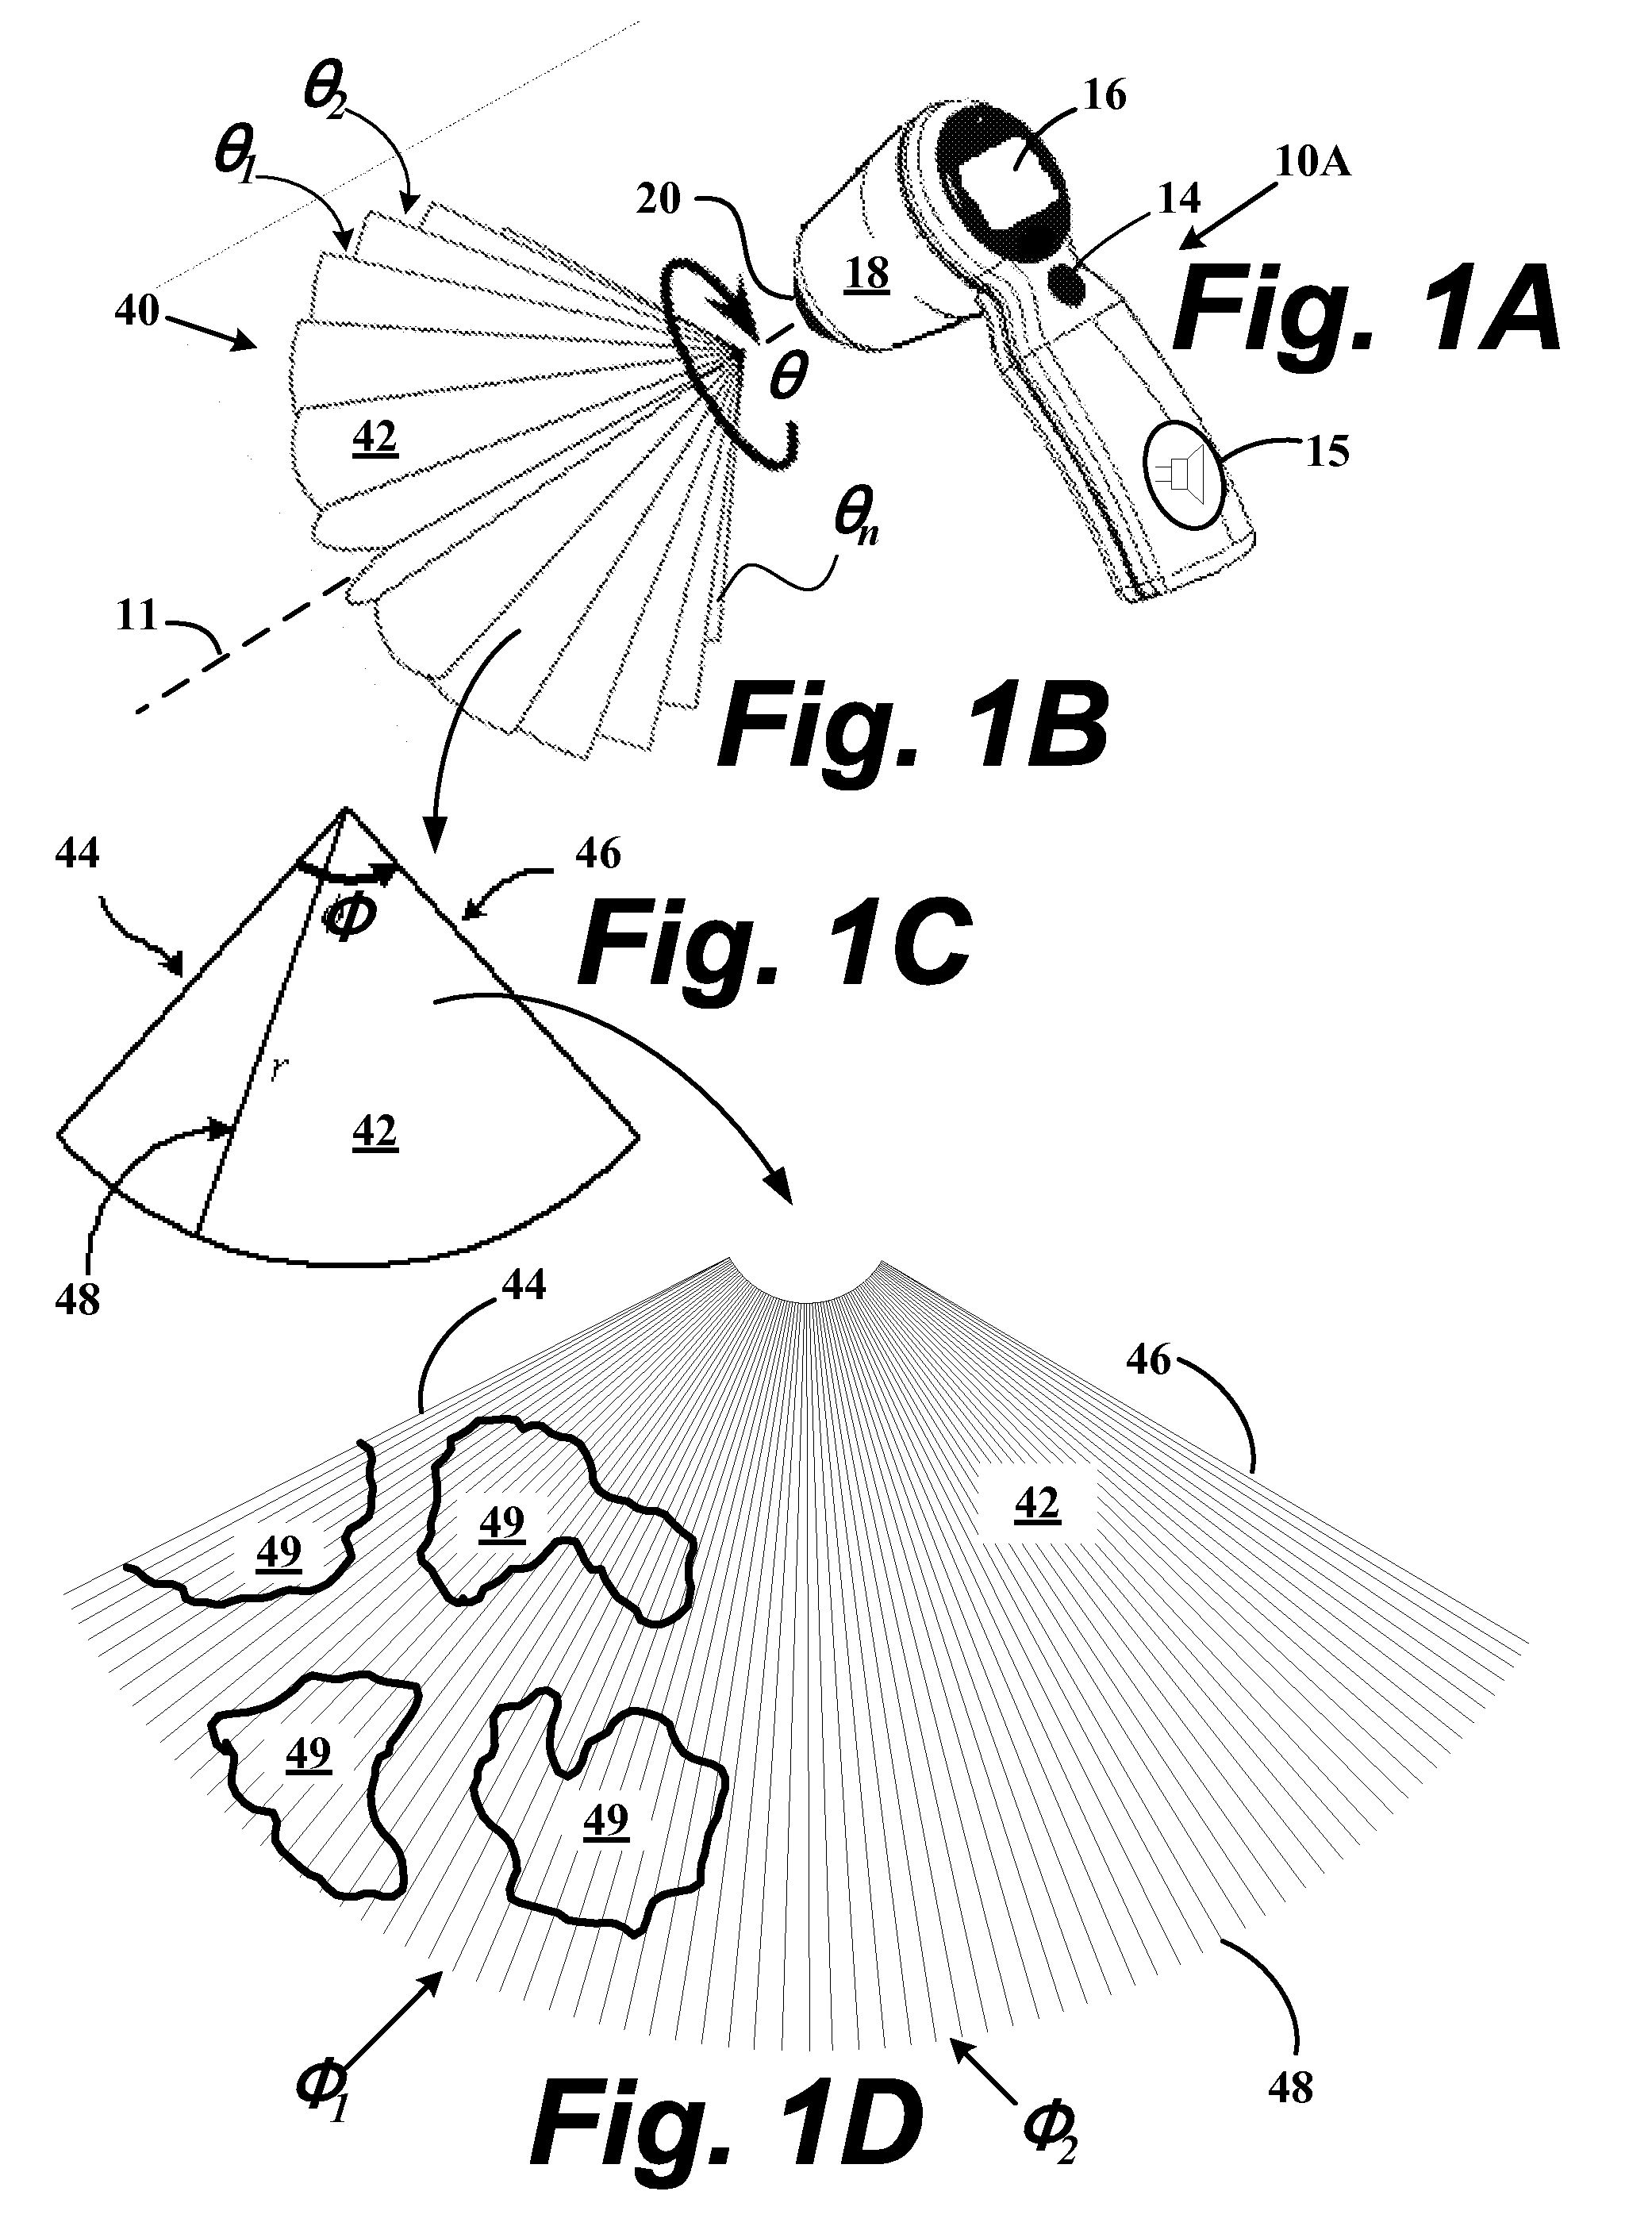 System and method to measure cardiac ejection fraction